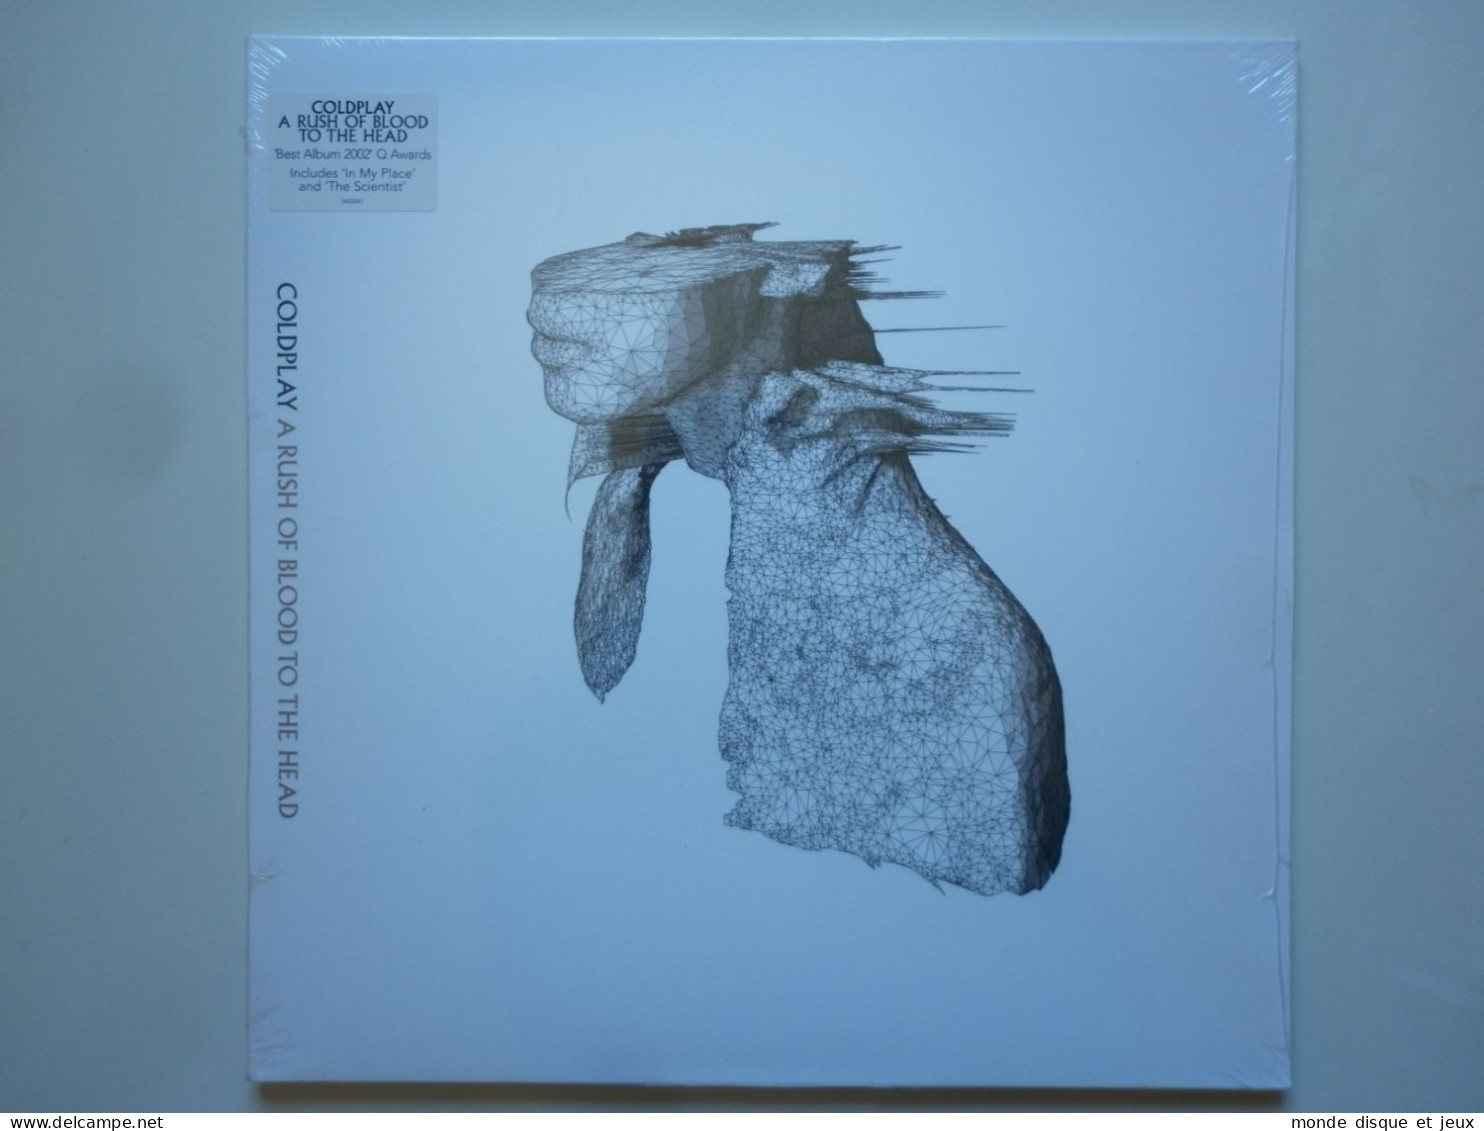 Coldplay Album 33Tours Vinyle A Rush Of Blood To The Head - Andere - Franstalig